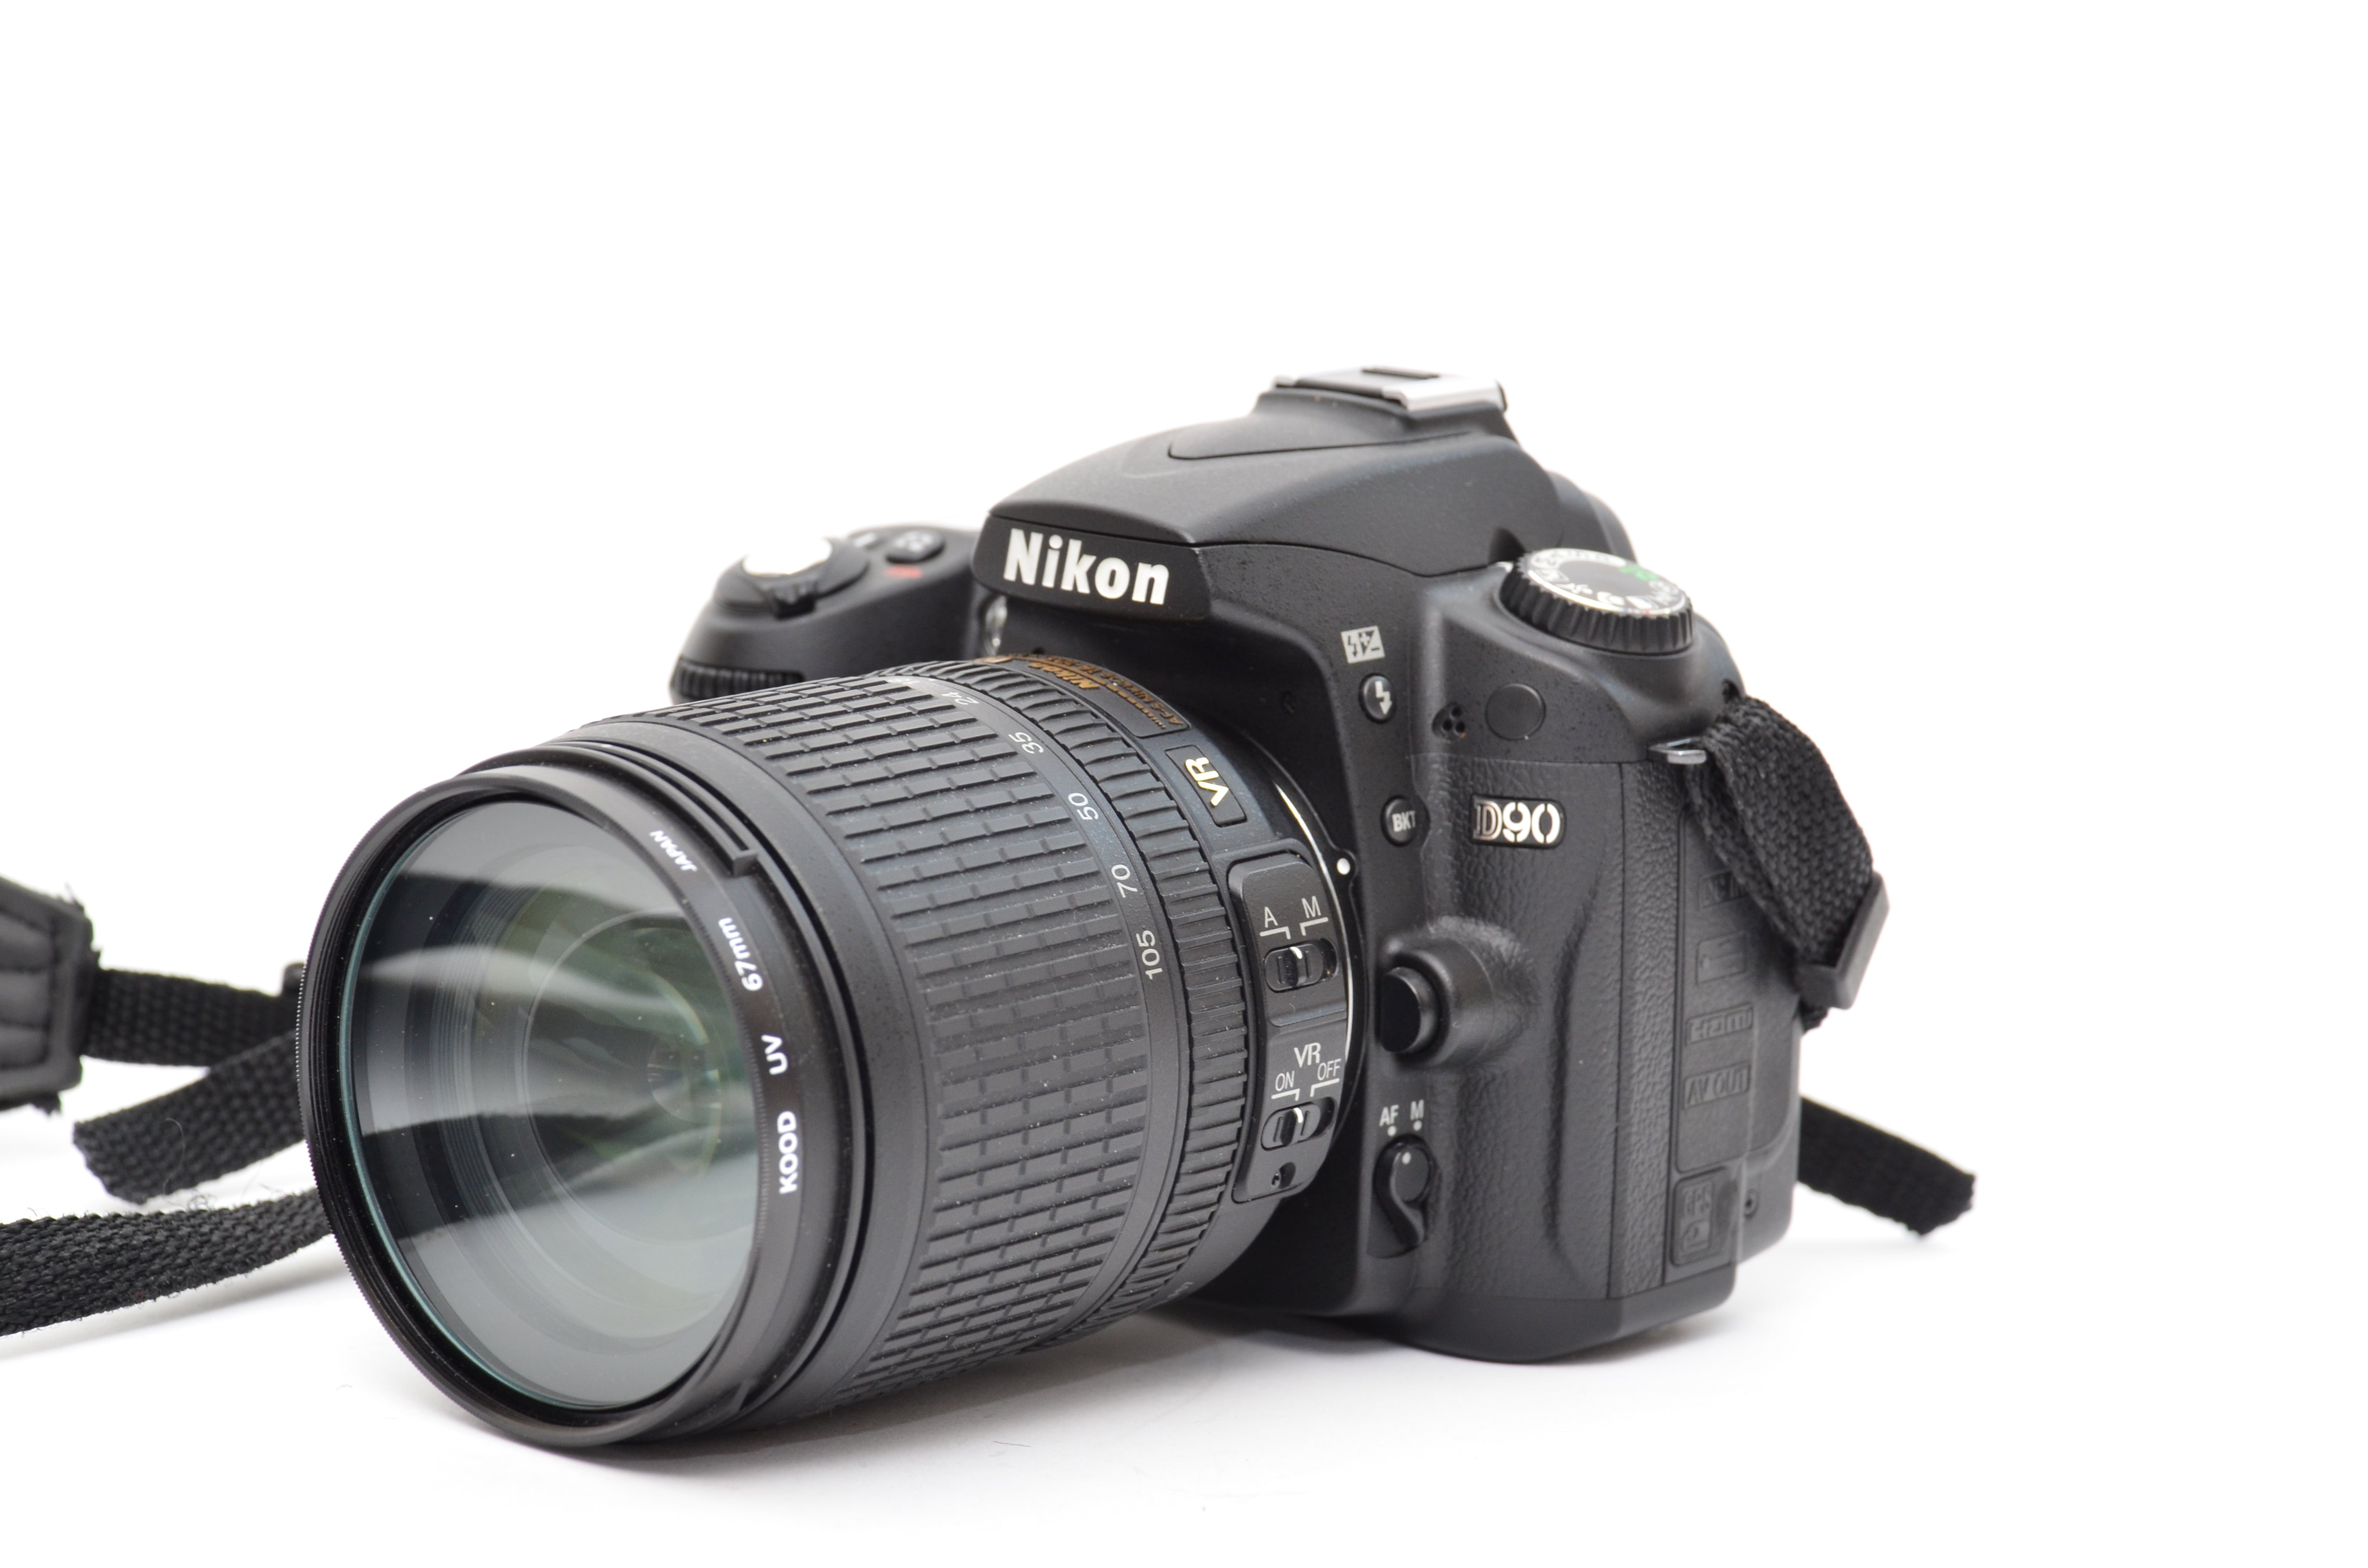 Used Nikon D90 with 18-105mm f/3.5-5.6G ED VR